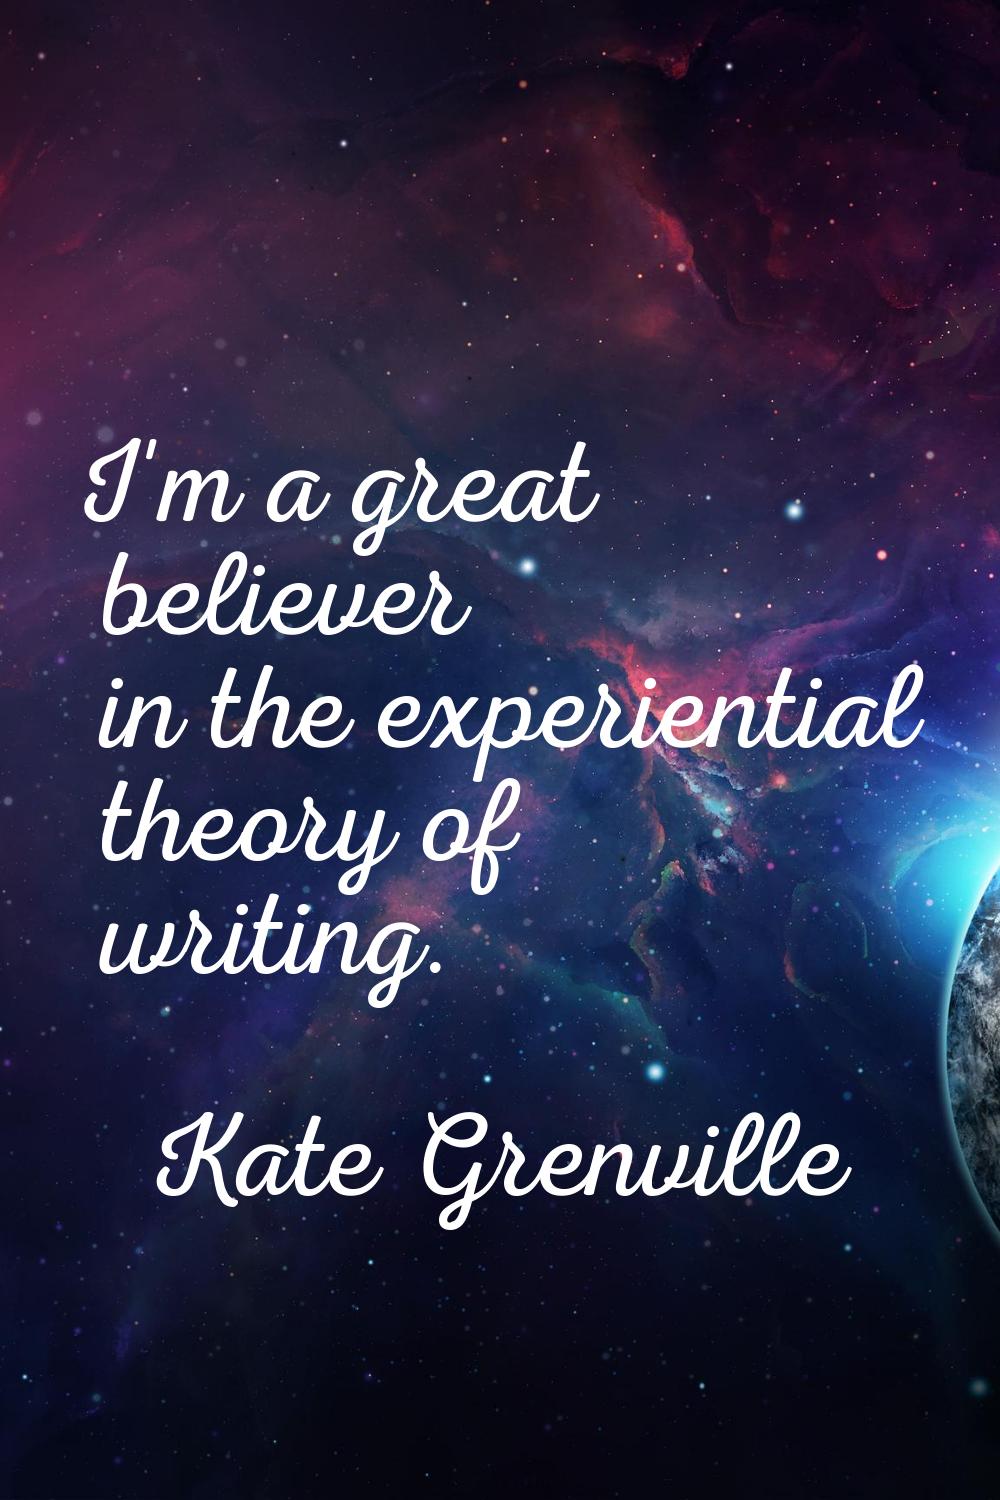 I'm a great believer in the experiential theory of writing.